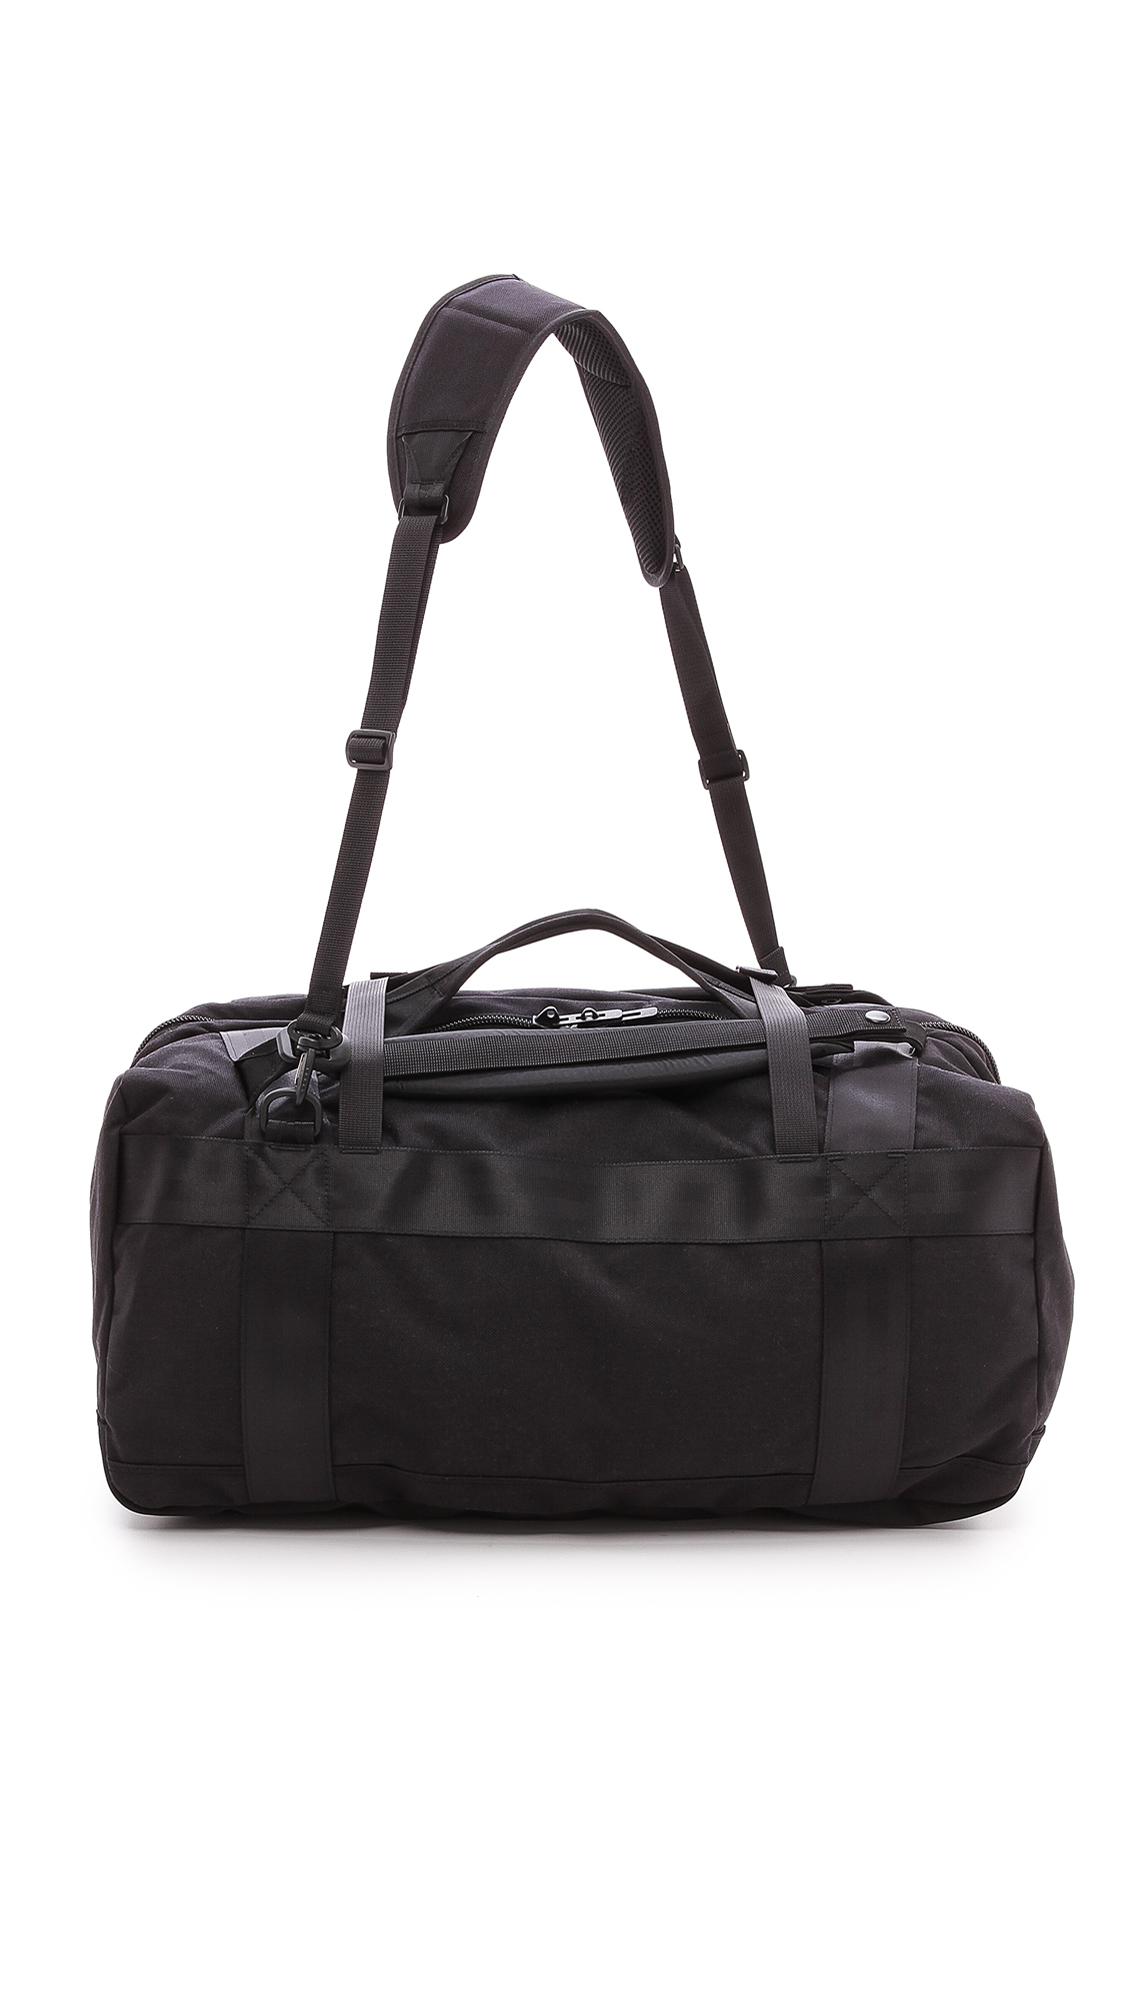 Porter Synthetic Booth Pack 3-way Duffel Bag in Black for Men - Lyst